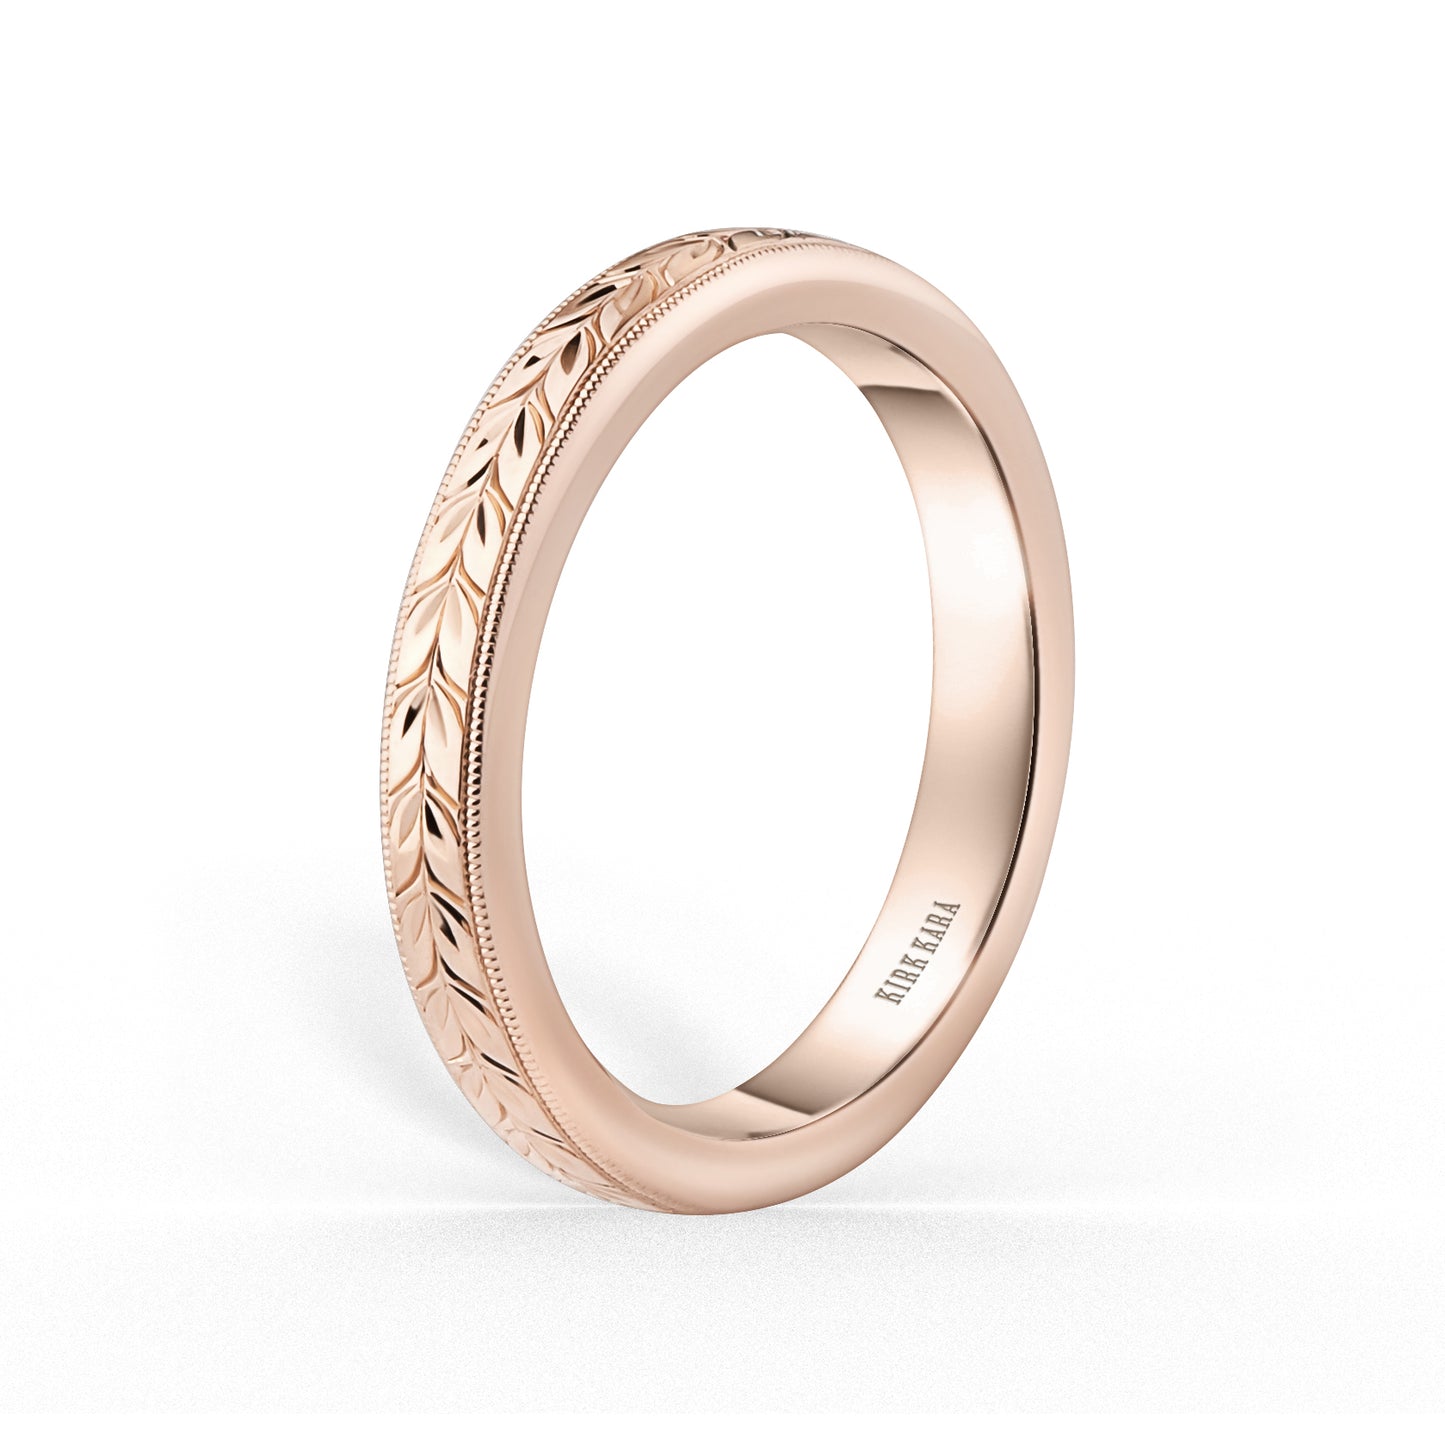 Thin Floral Engraved Wedding Band, 3mm